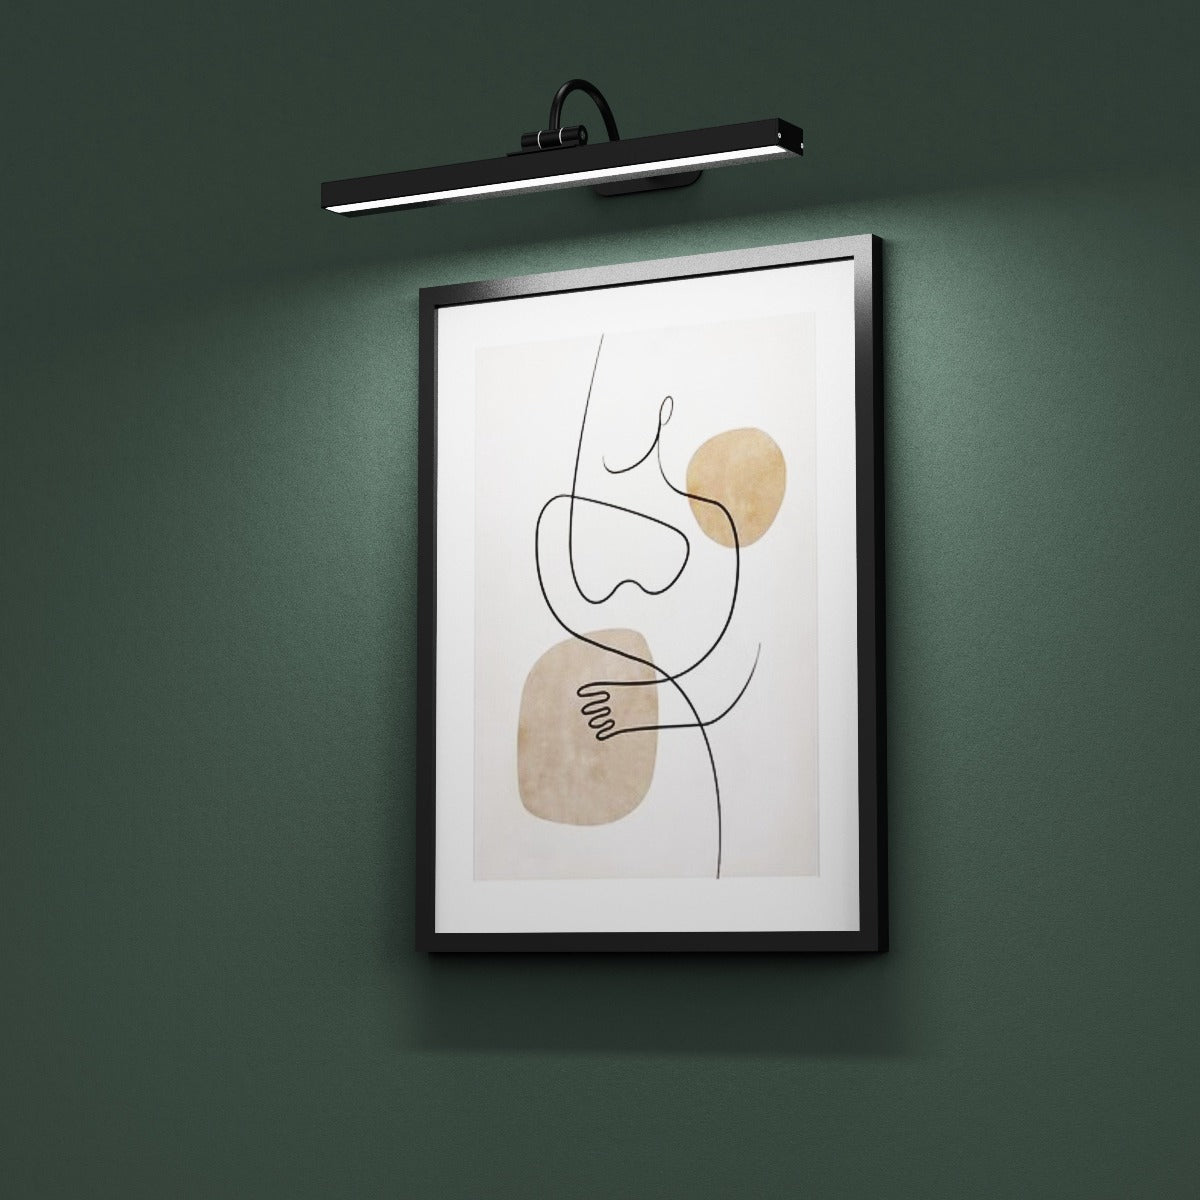  Virgo's elegant and stylish finish makes it the ideal addition to any room. It will look perfect in both traditional and modern environments. The beauty of this wall light means you can install it on any wall without the requirement of expensive electrician fees and mains installation.